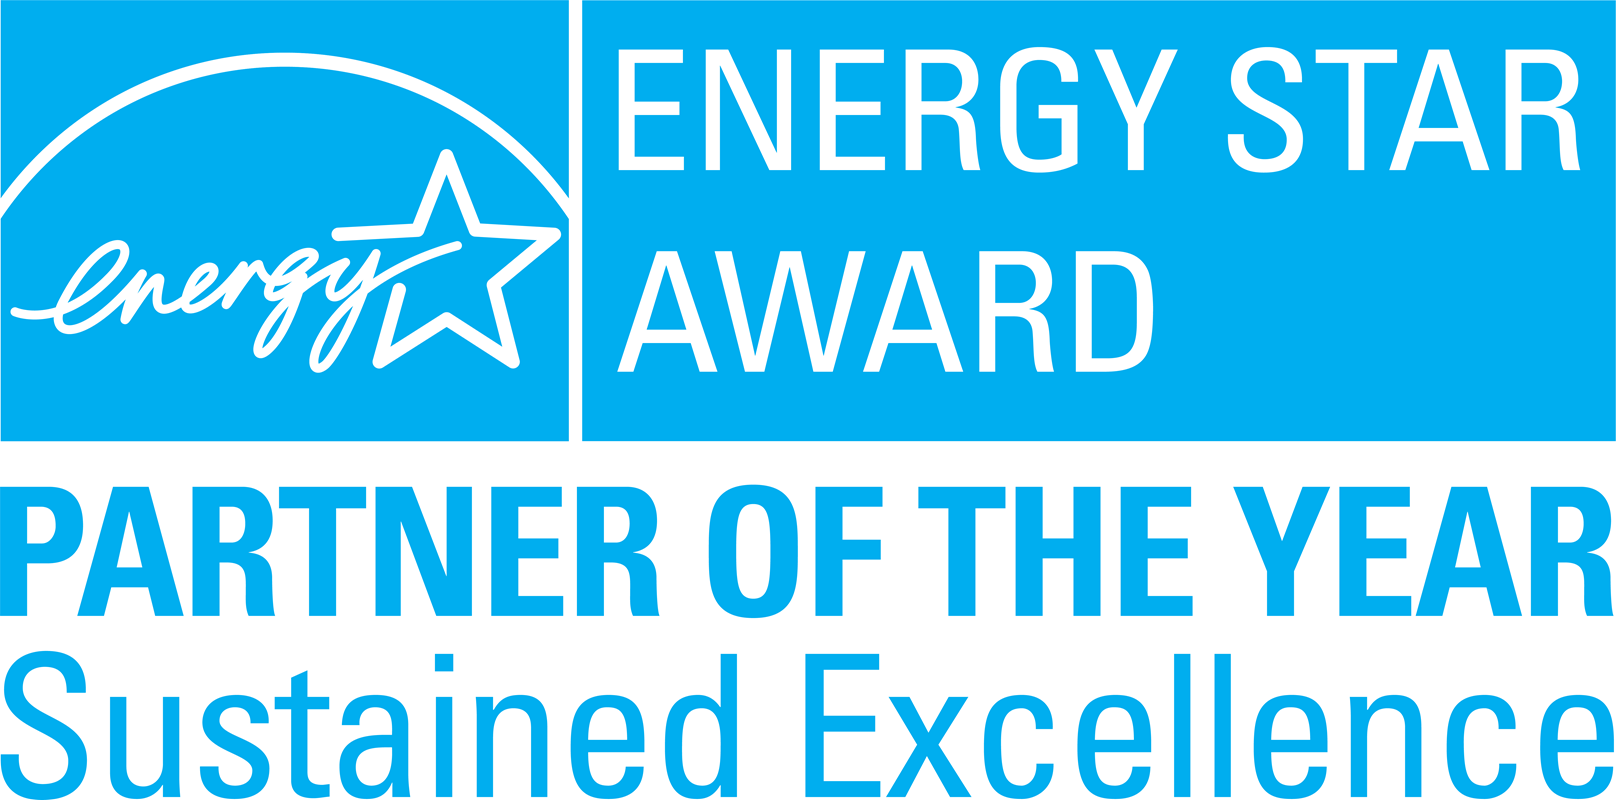 energy star partner year sustained excellence